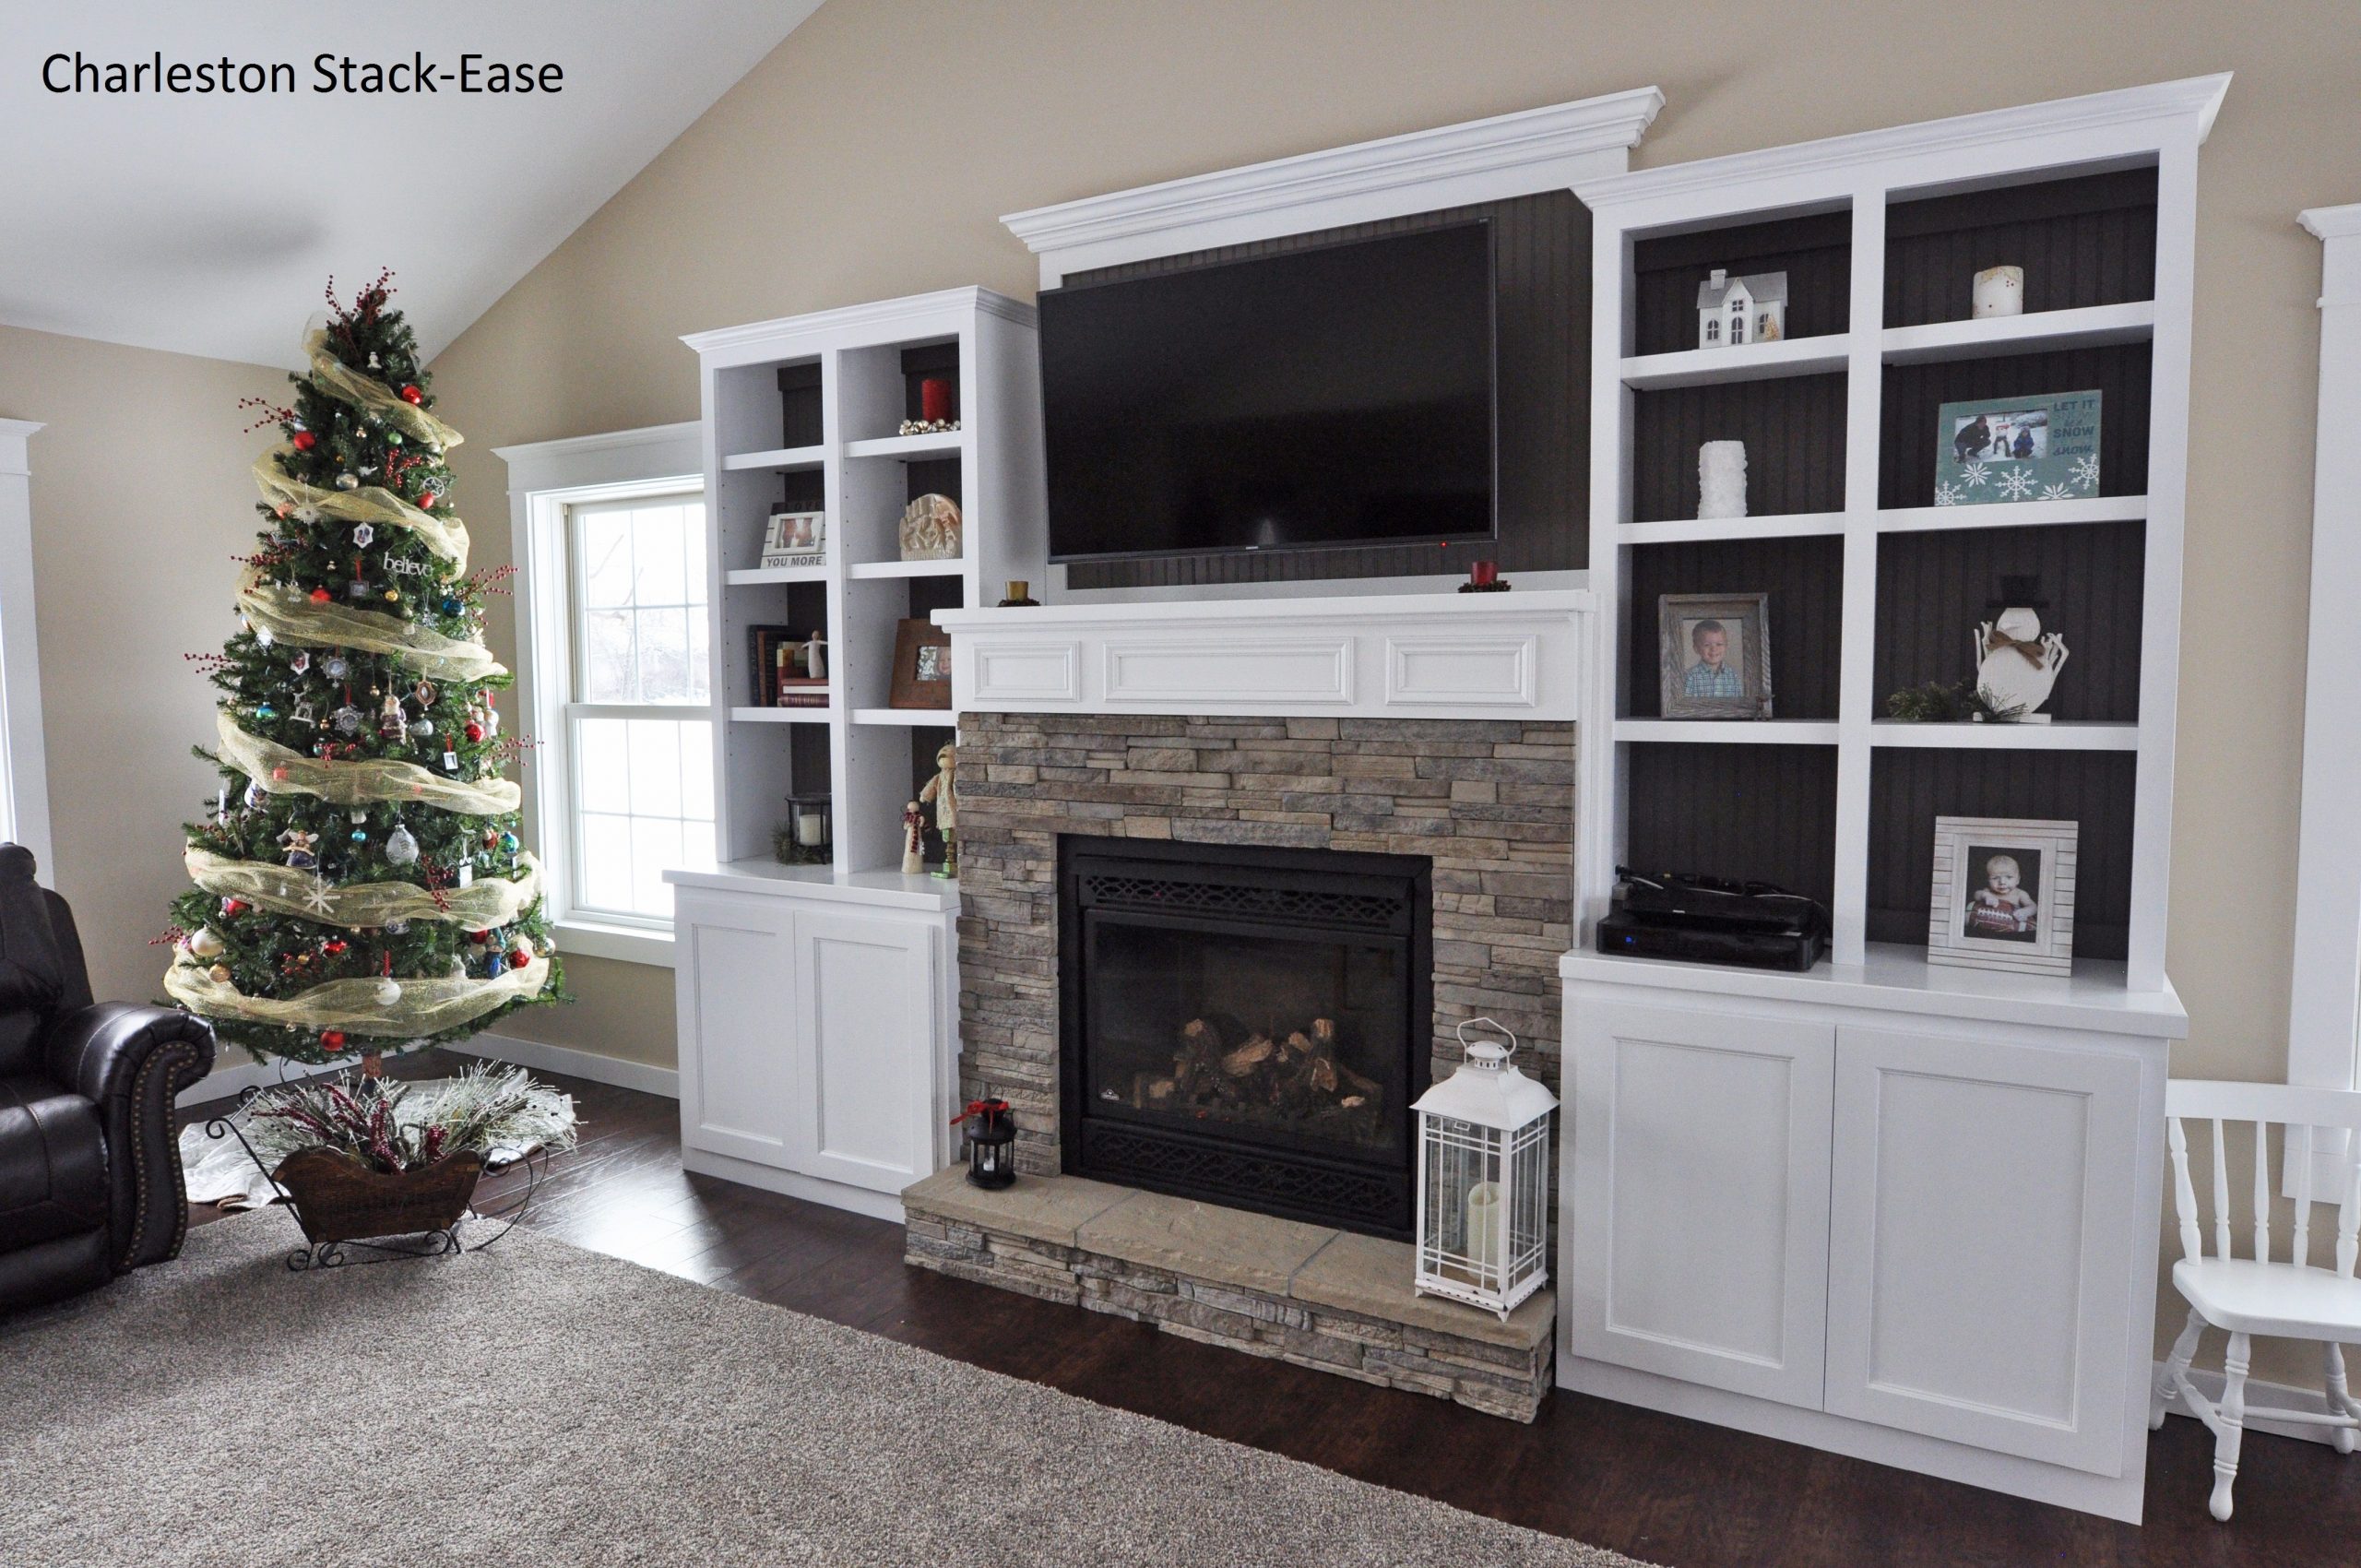 Stoned Fireplace With Built Ins Charleston Stack Ease Jn intended for measurements 4288 X 2848